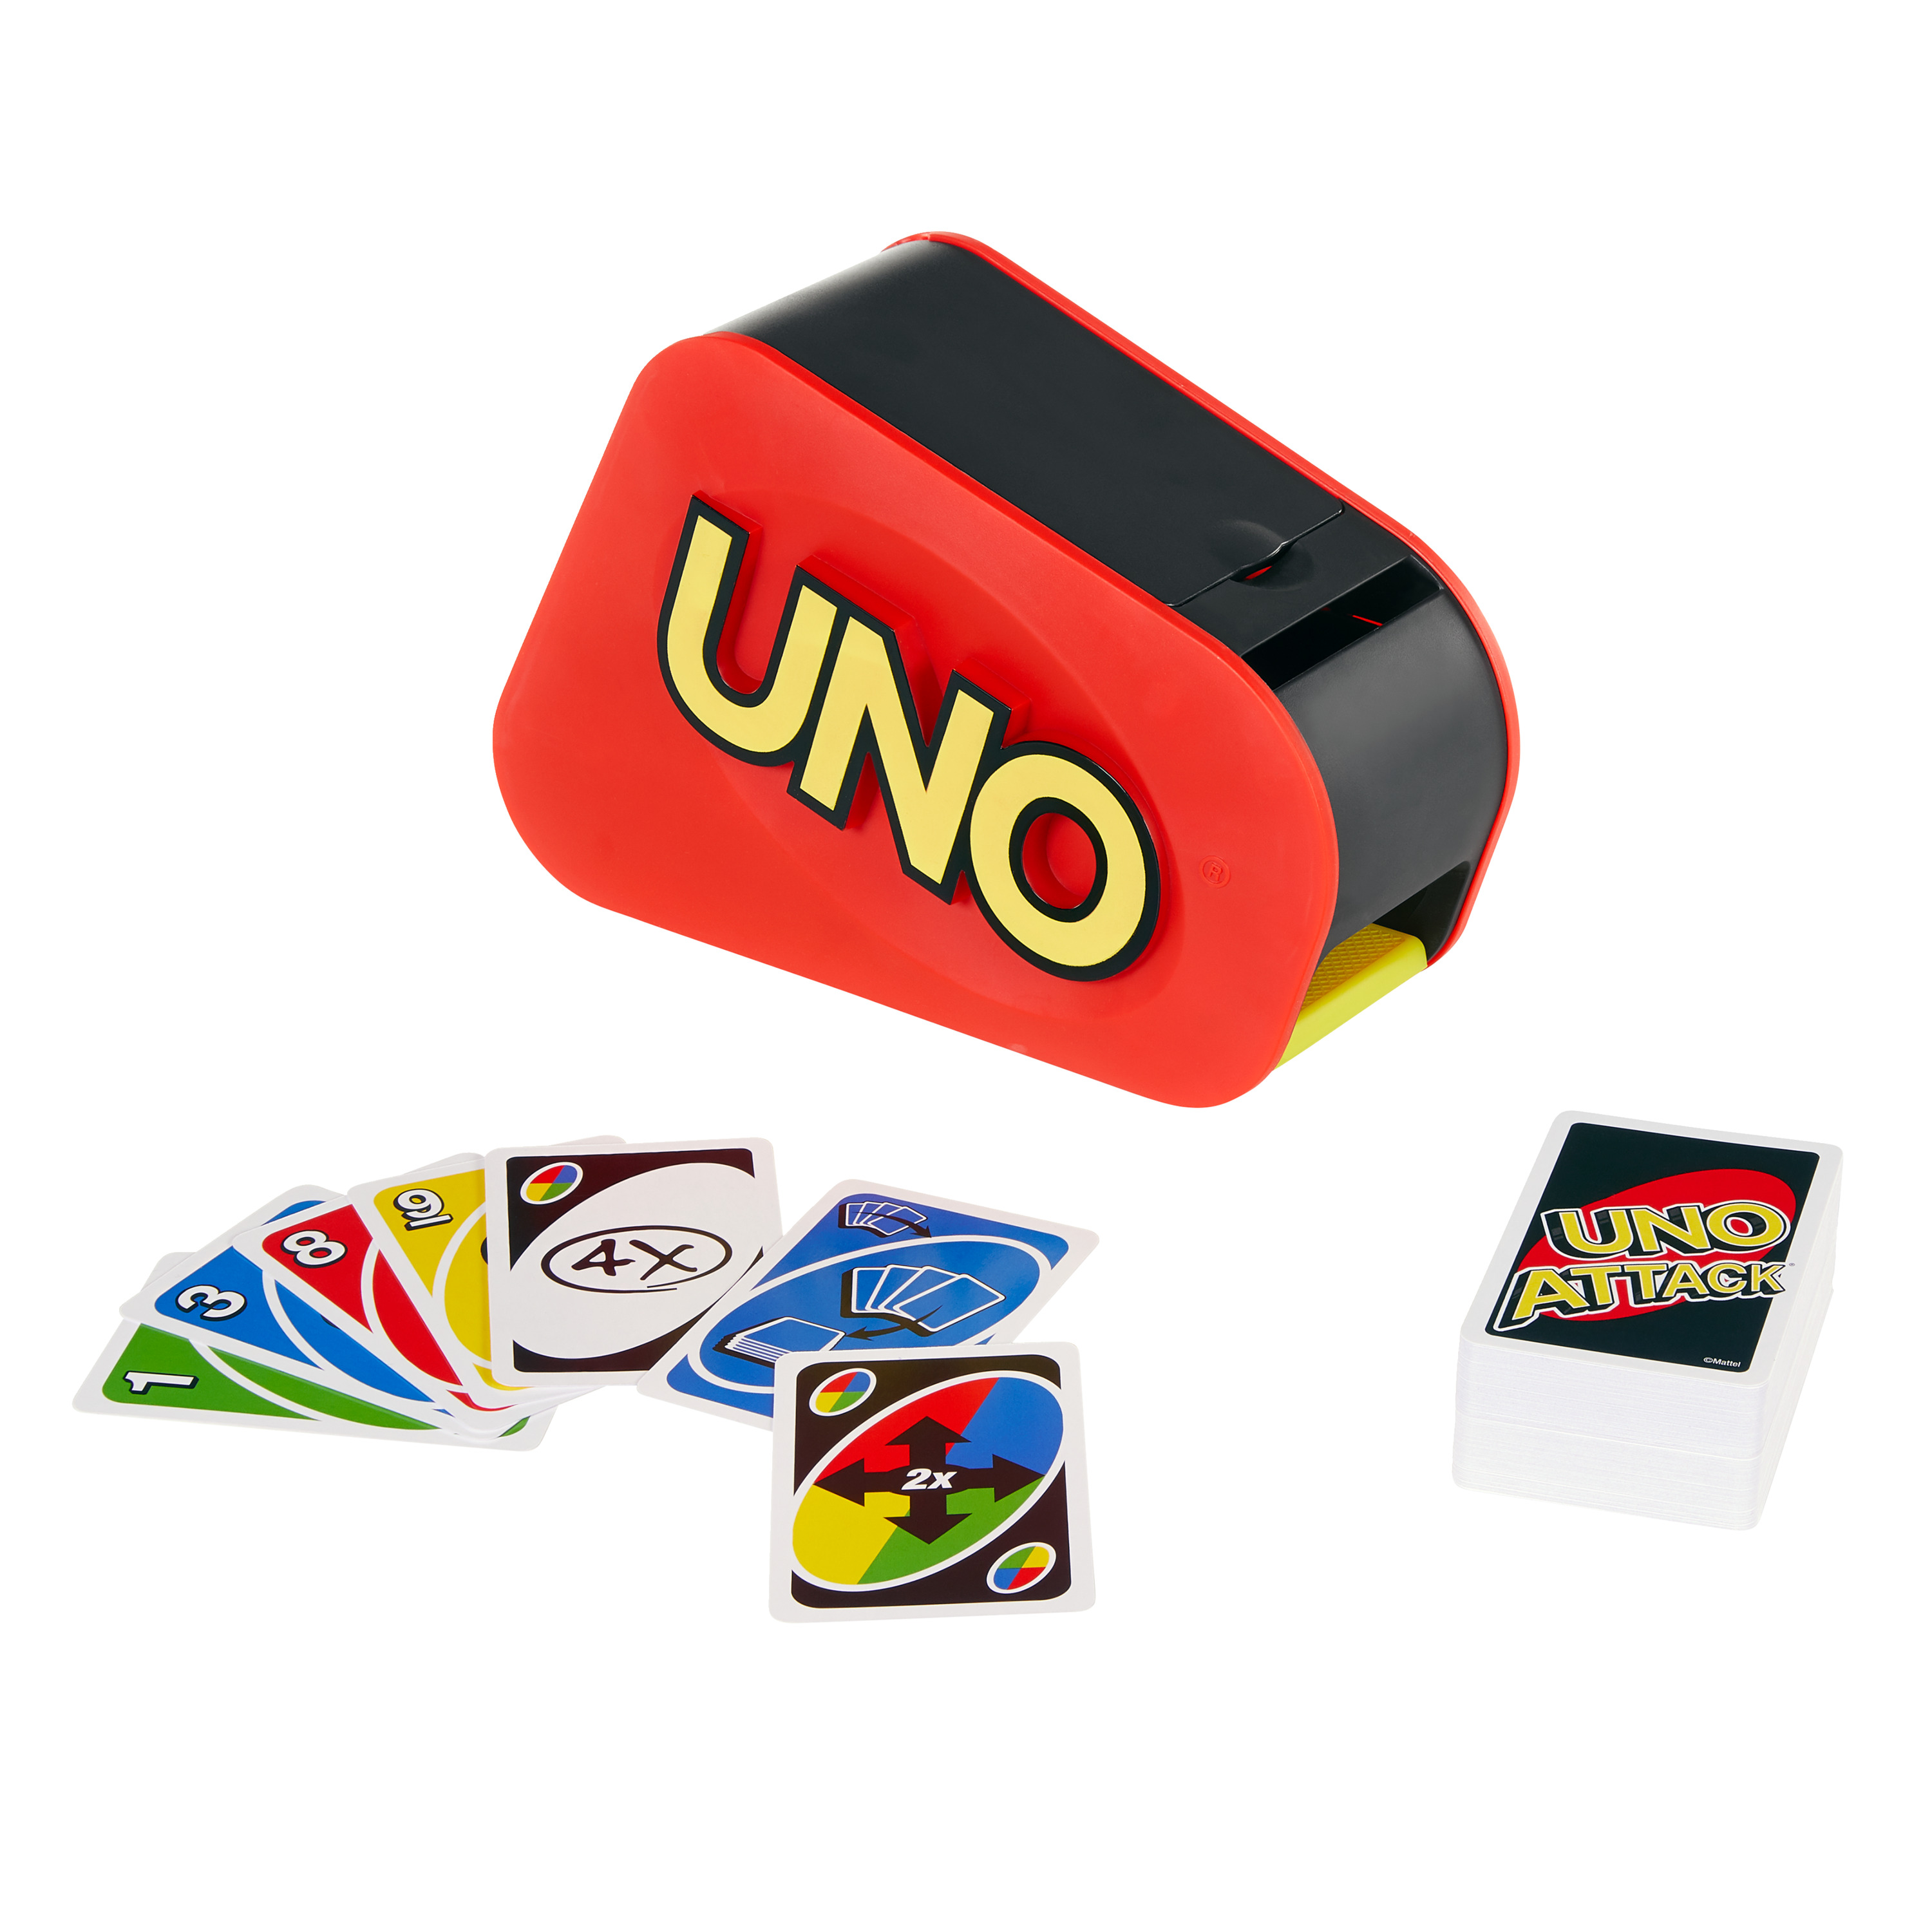 UNO Attack Card Game for Family Night with Card Launcher Featuring Lights & Sounds - image 1 of 7